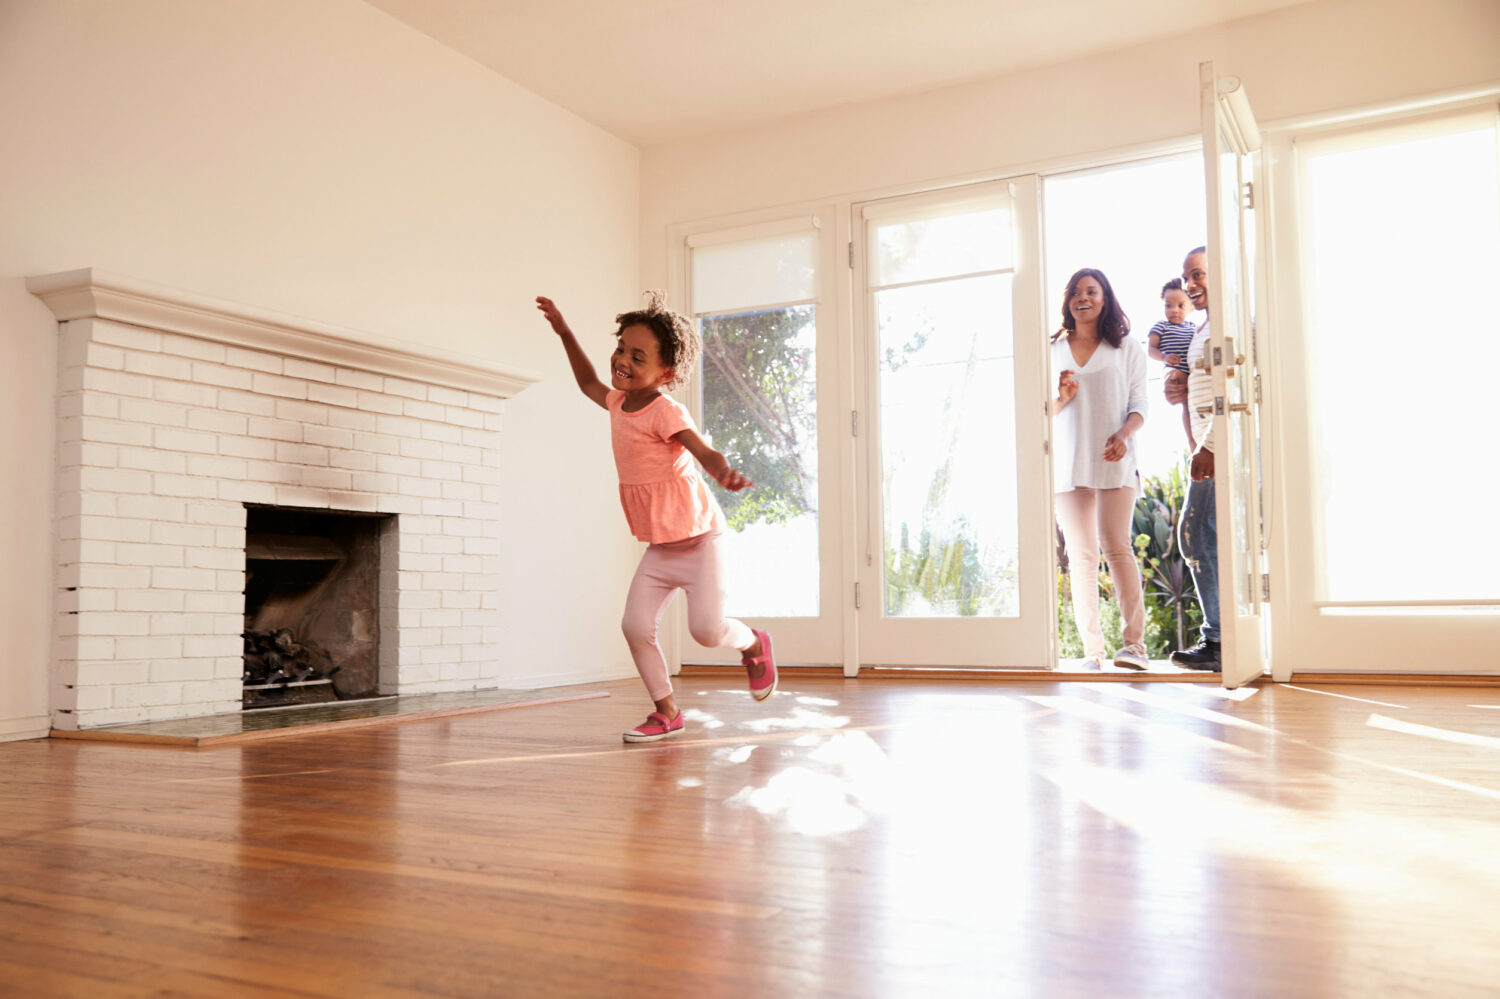 Image description: Excited Family Explore New Home On Moving Day